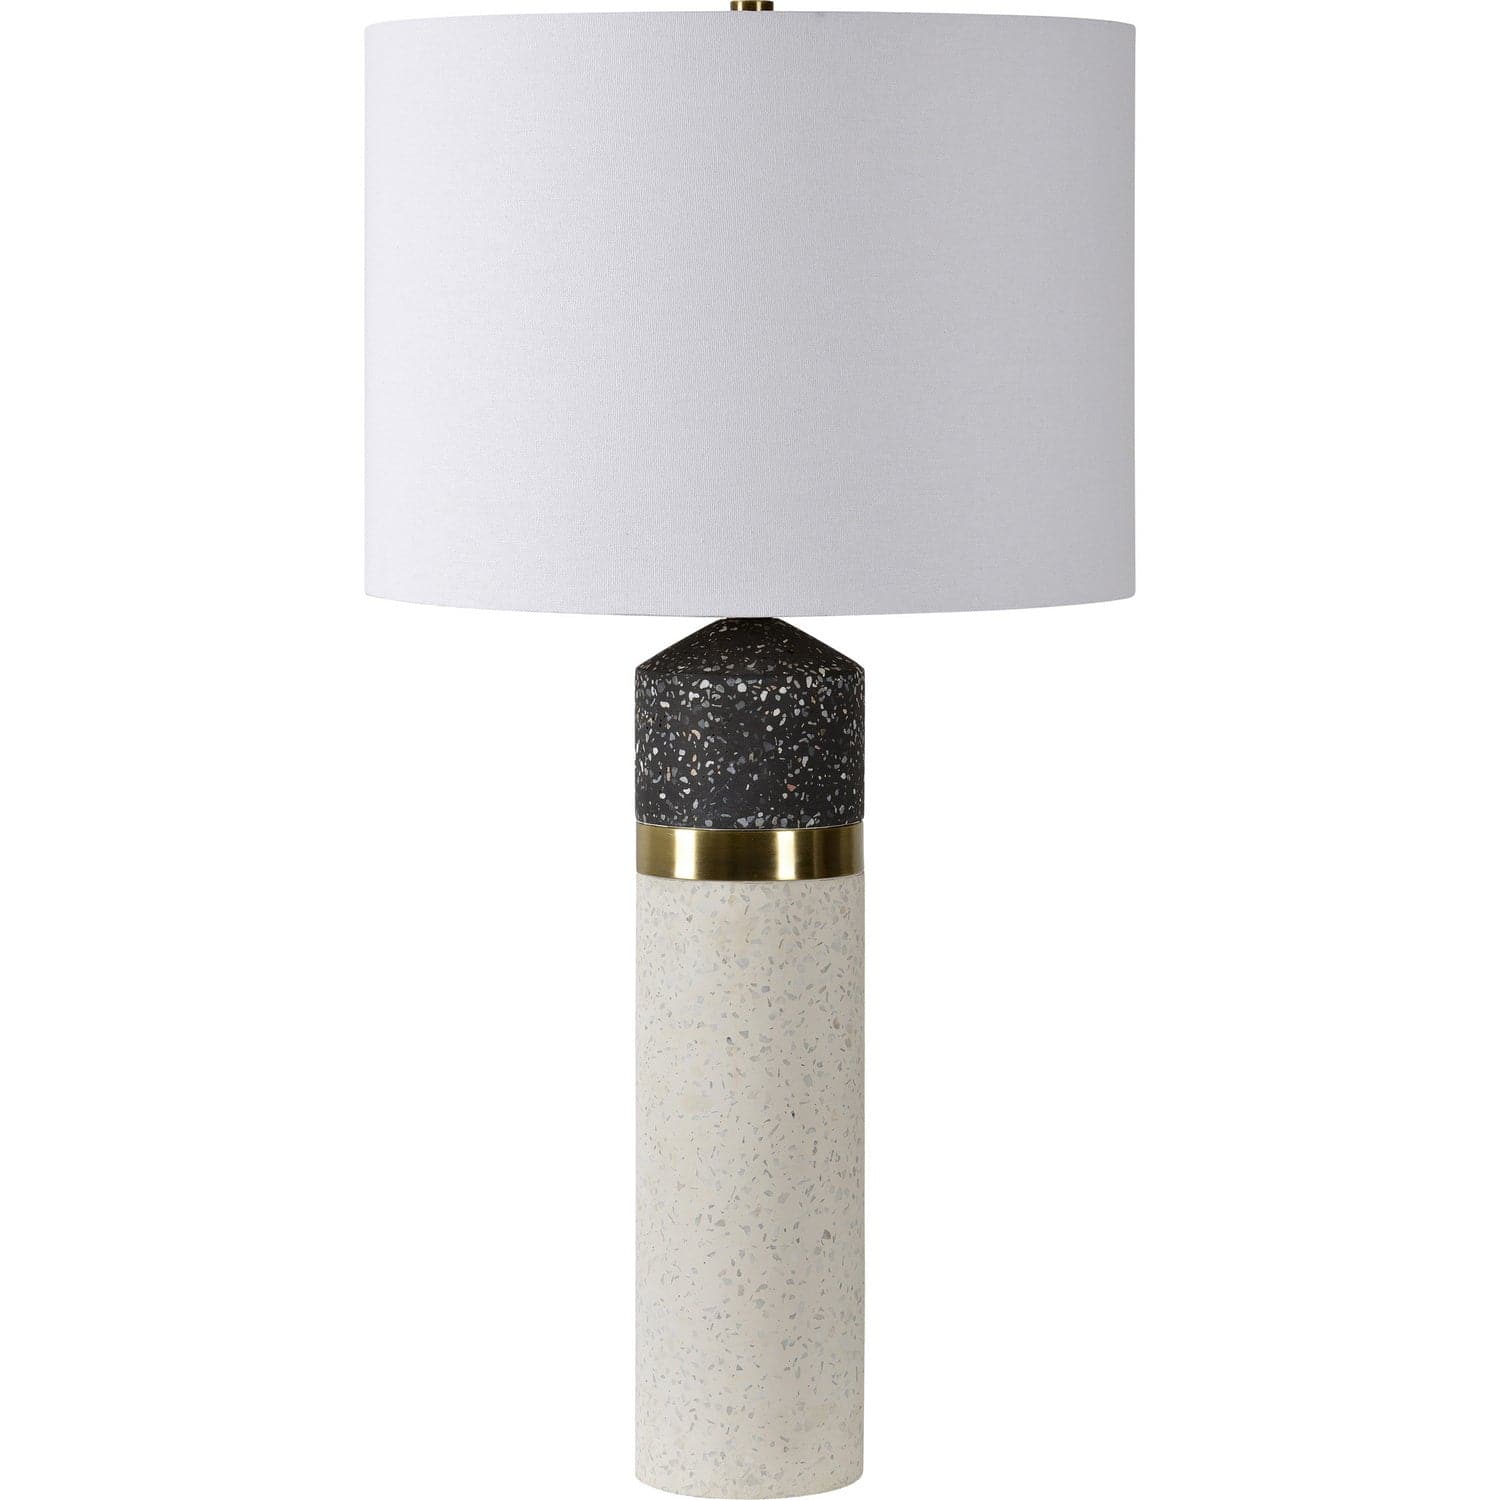 Renwil - LPT1183 - One Light Table Lamp - Kaitlyn - Natural White/ Black With Speckles,White